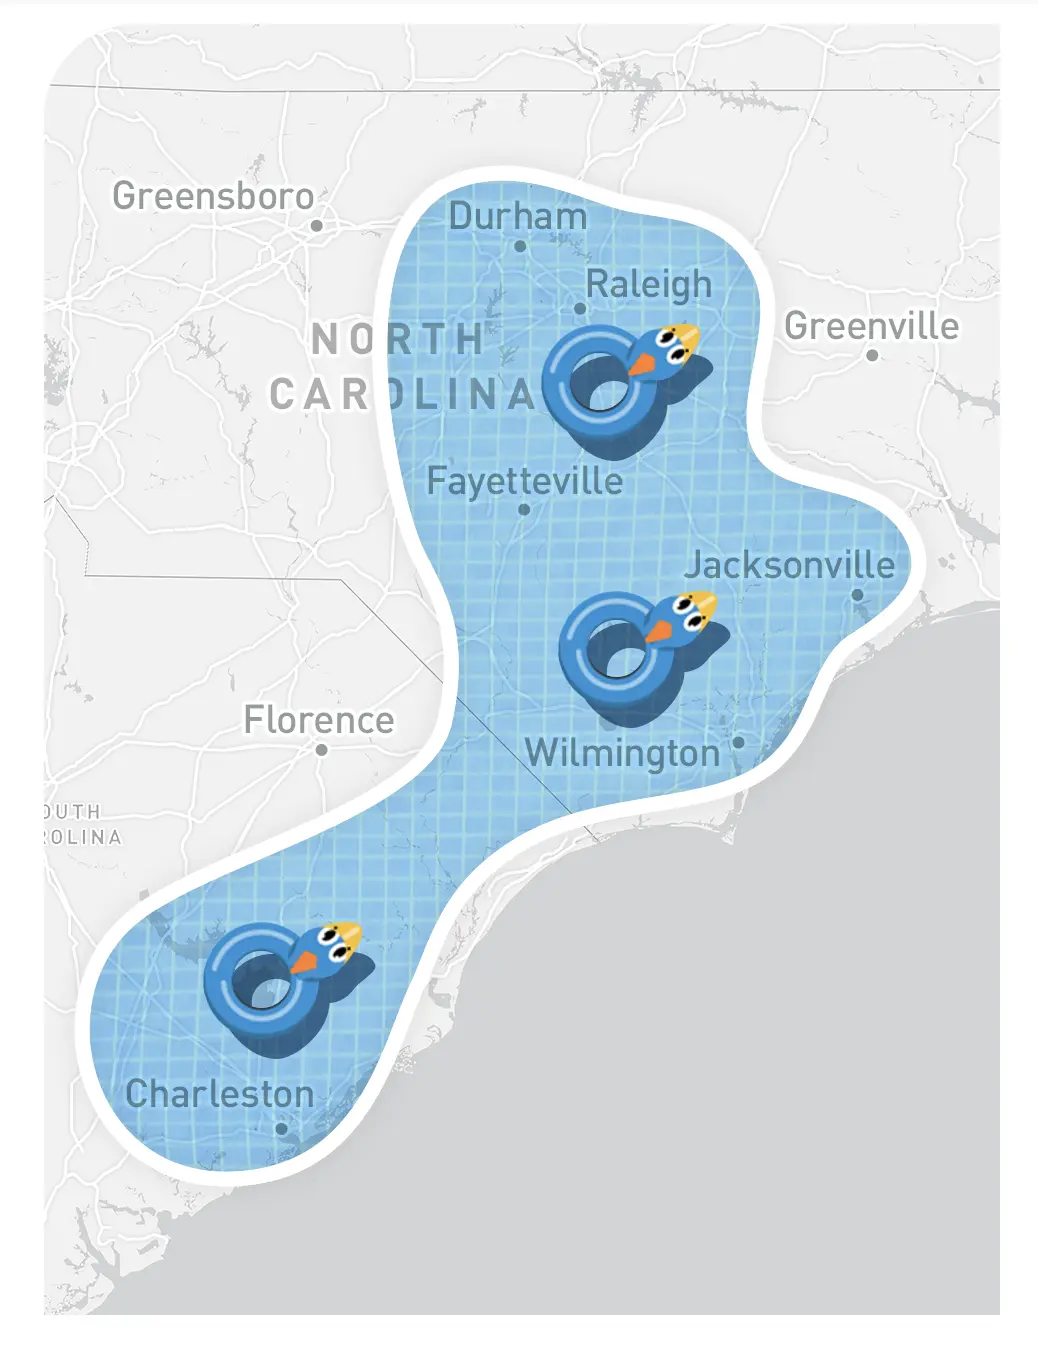 Graphic of Parrot Bay Pools' pool installation service areas in North Carolina and South Carolina.